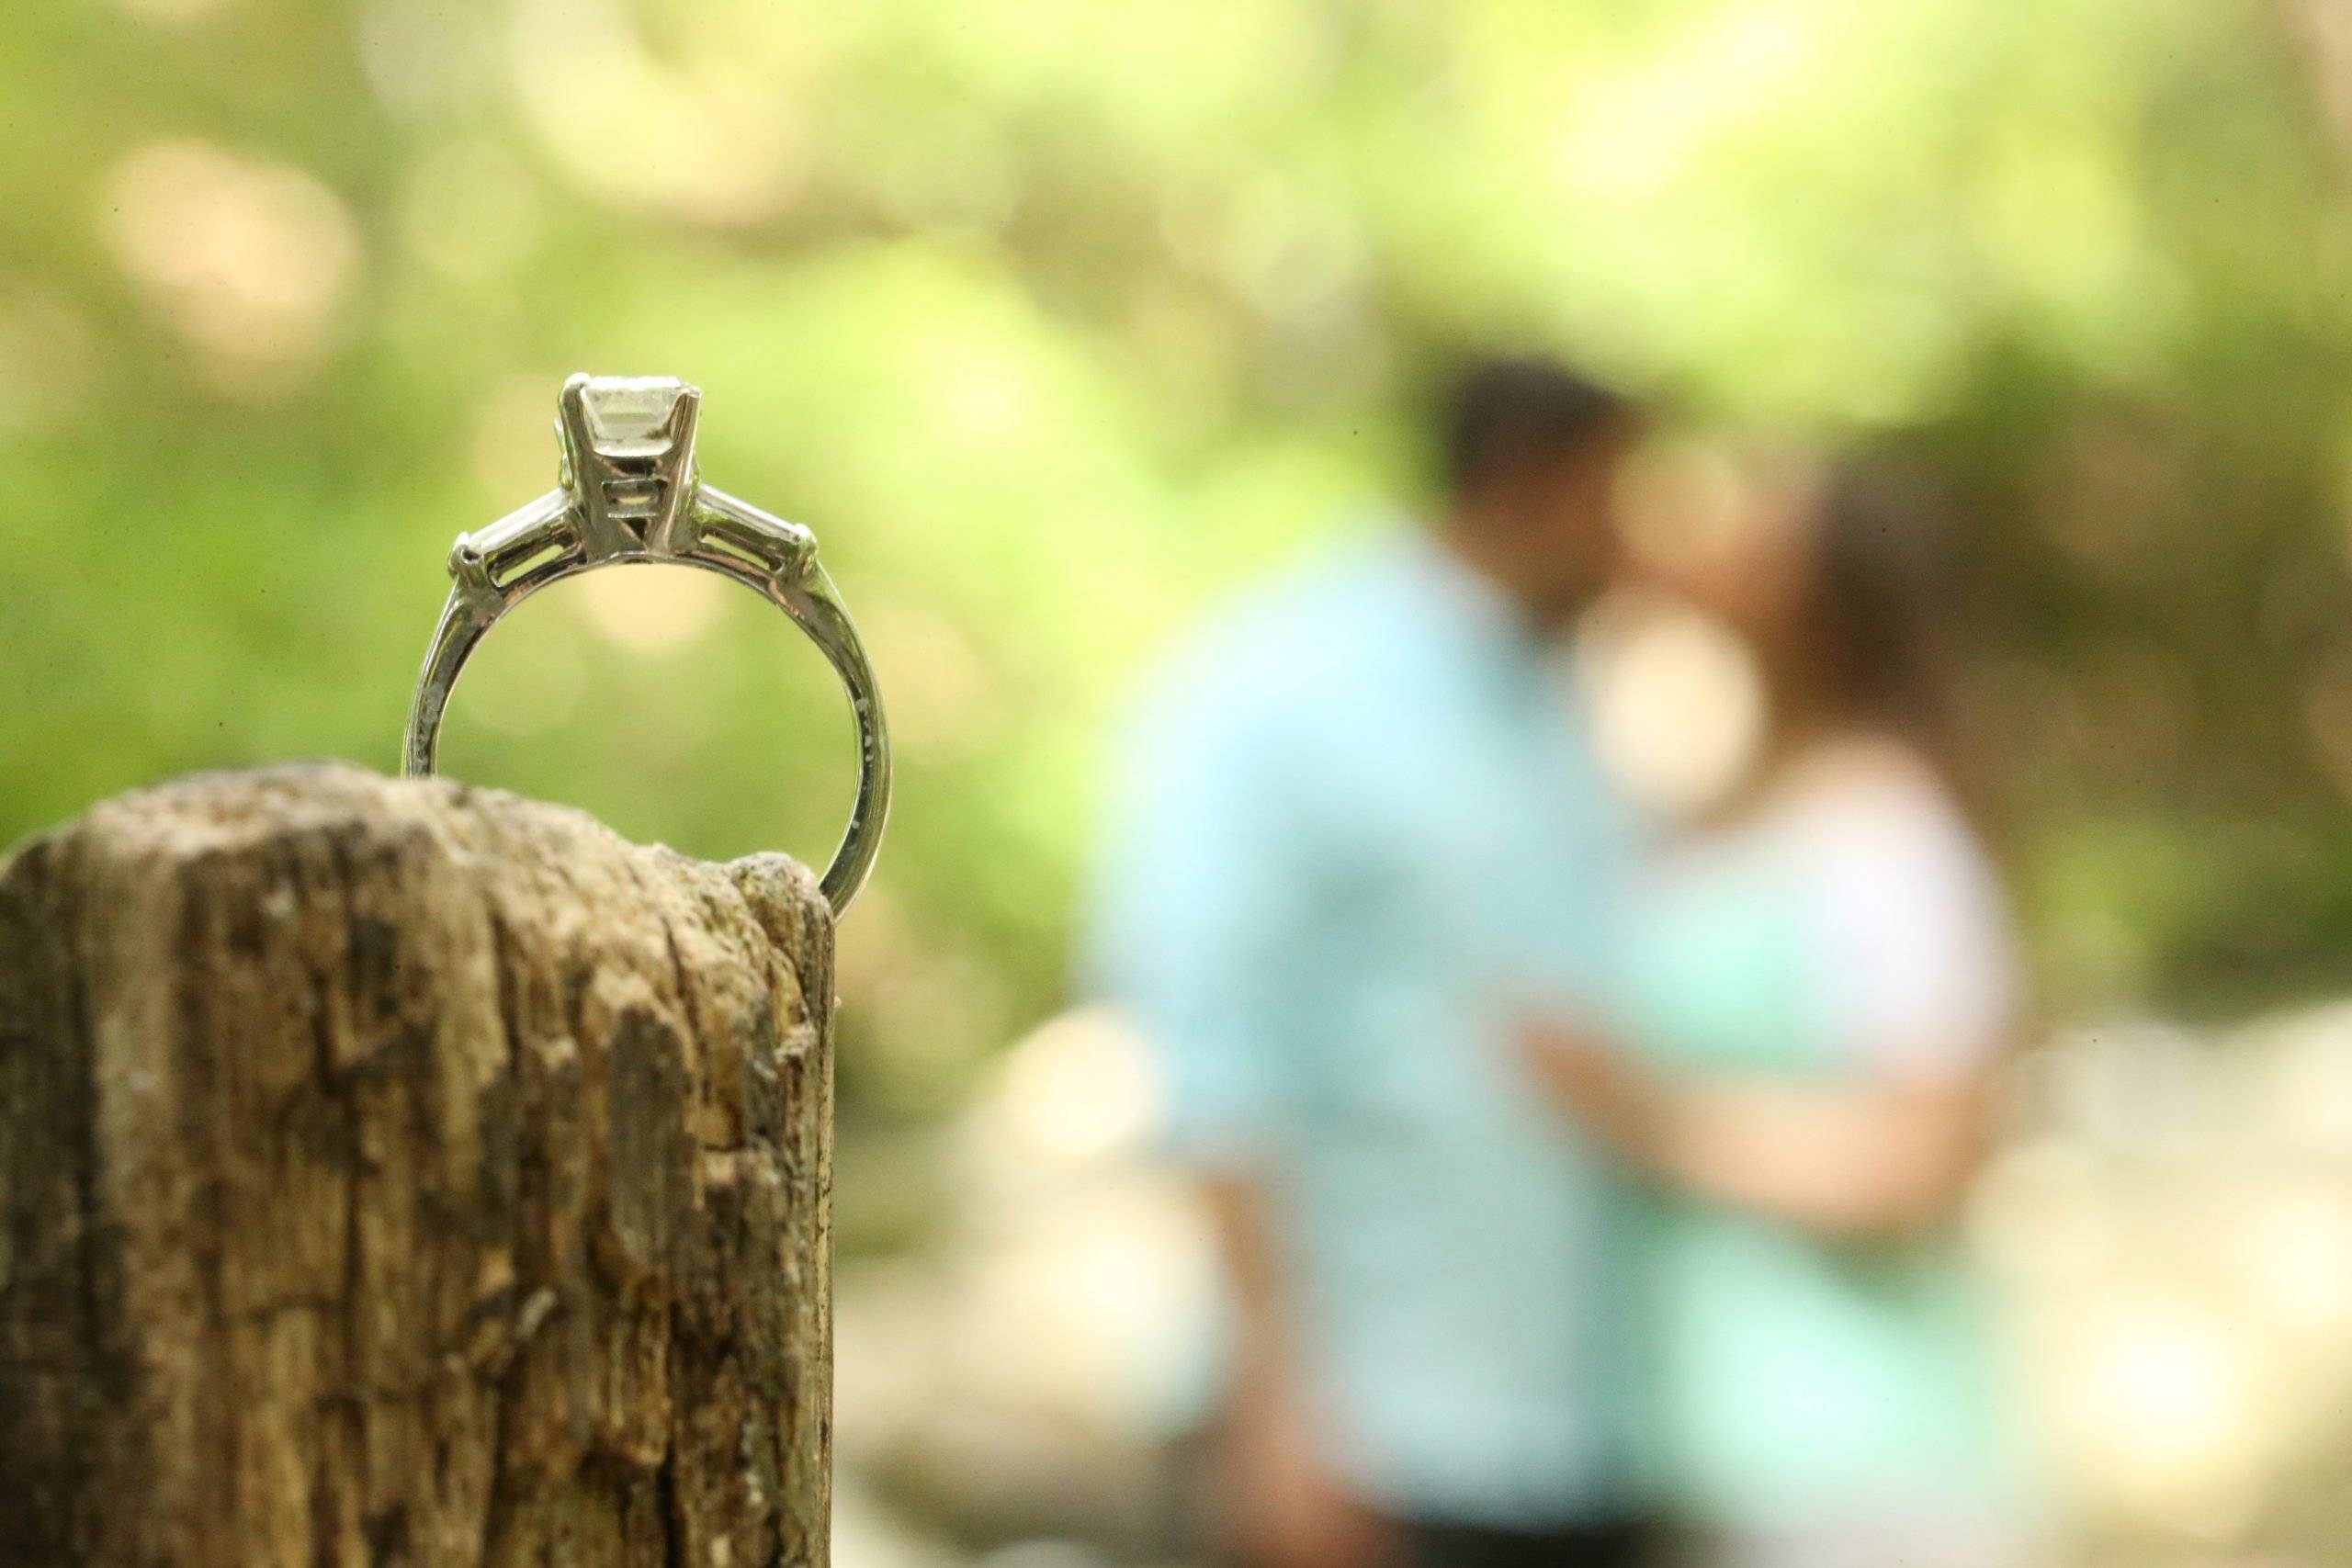 An engagement ring sits on top of a wooden post.